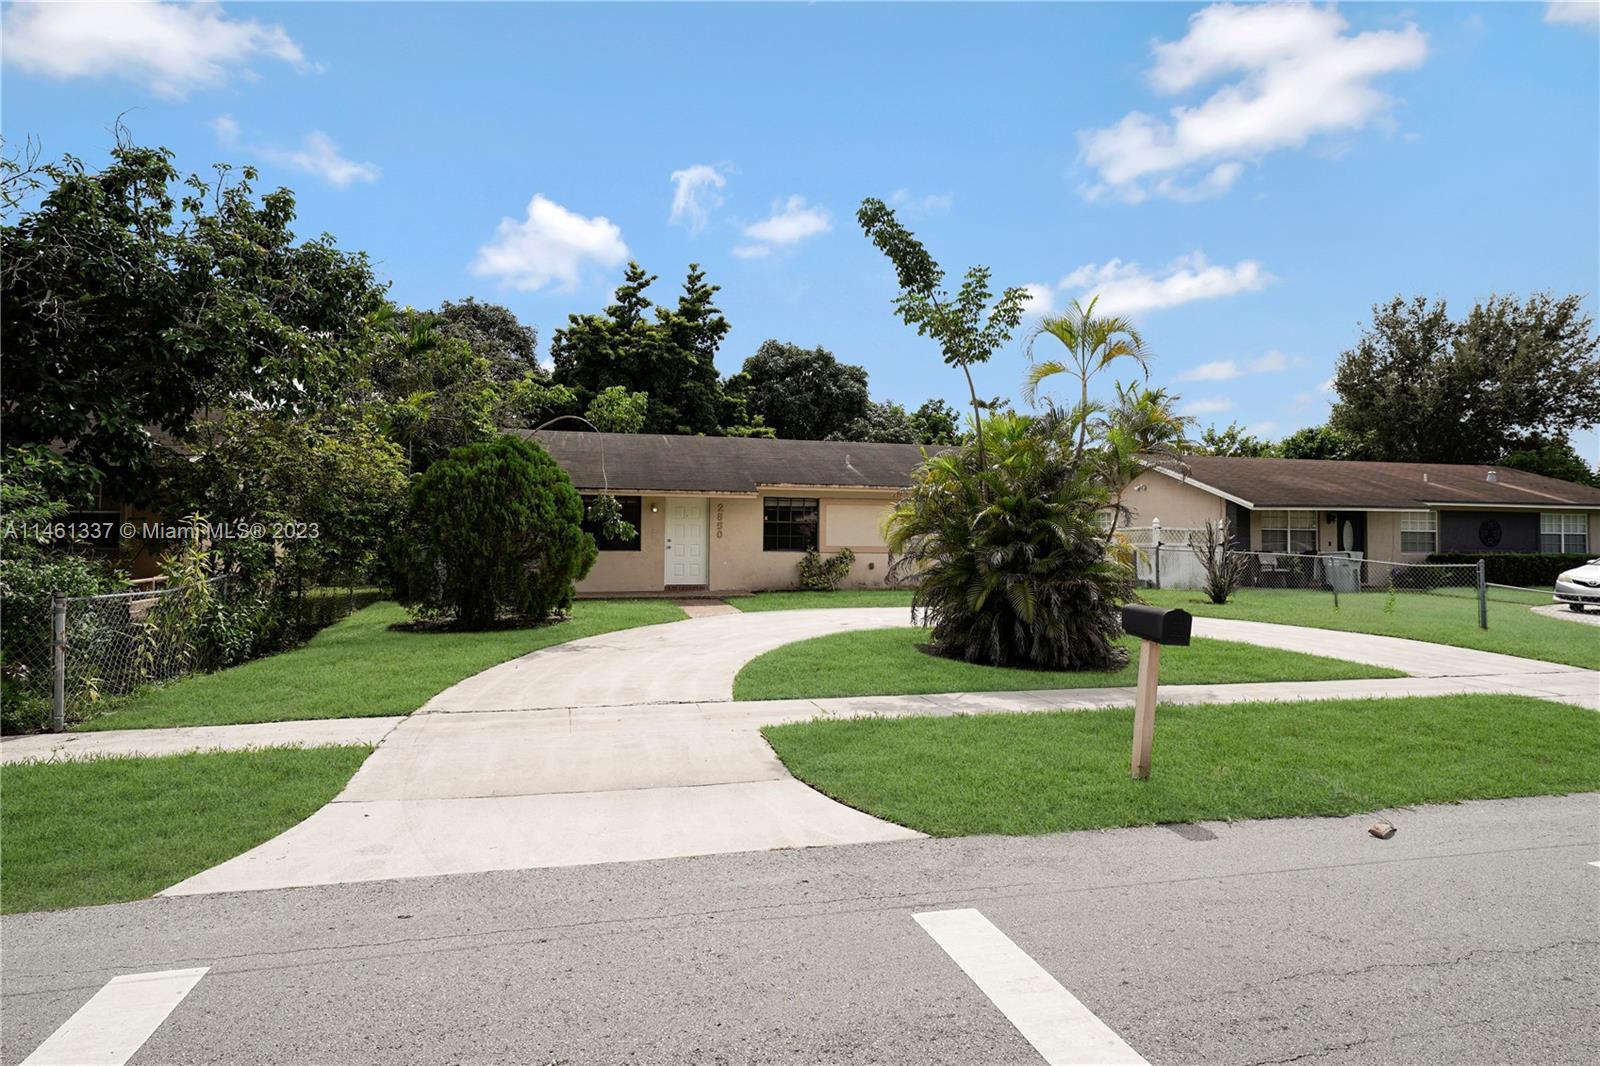 Immerse yourself in the with this 3 bedroom /2 bath home in Pompano Beach. Property has wood floors 